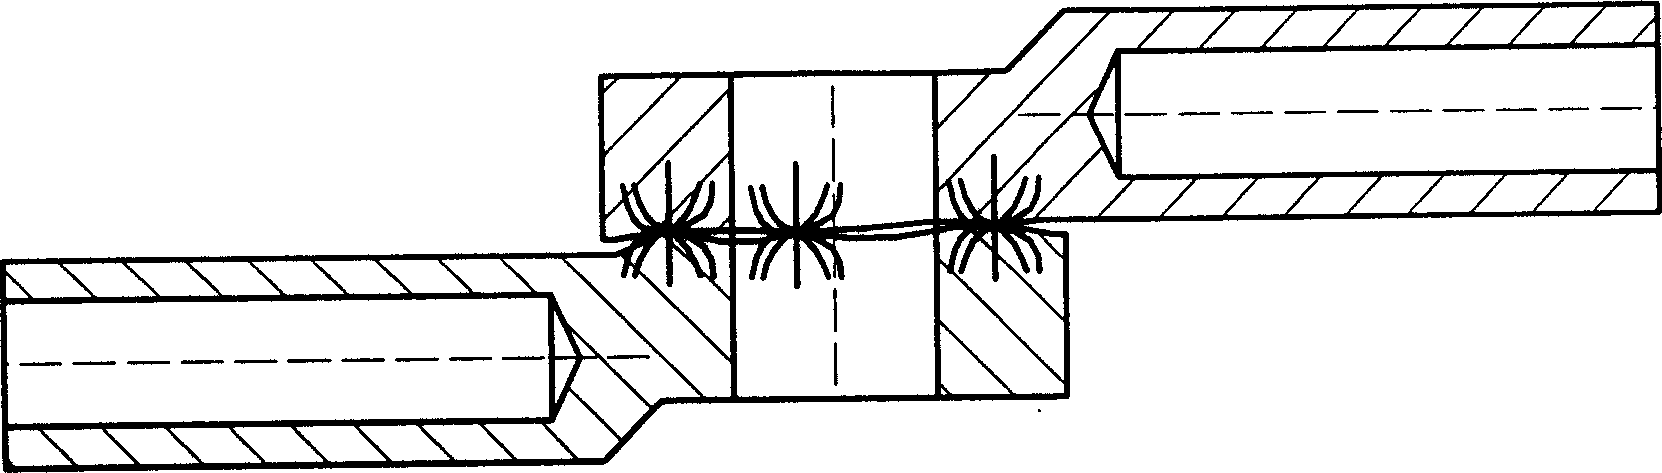 A conical surface electrical connection technique